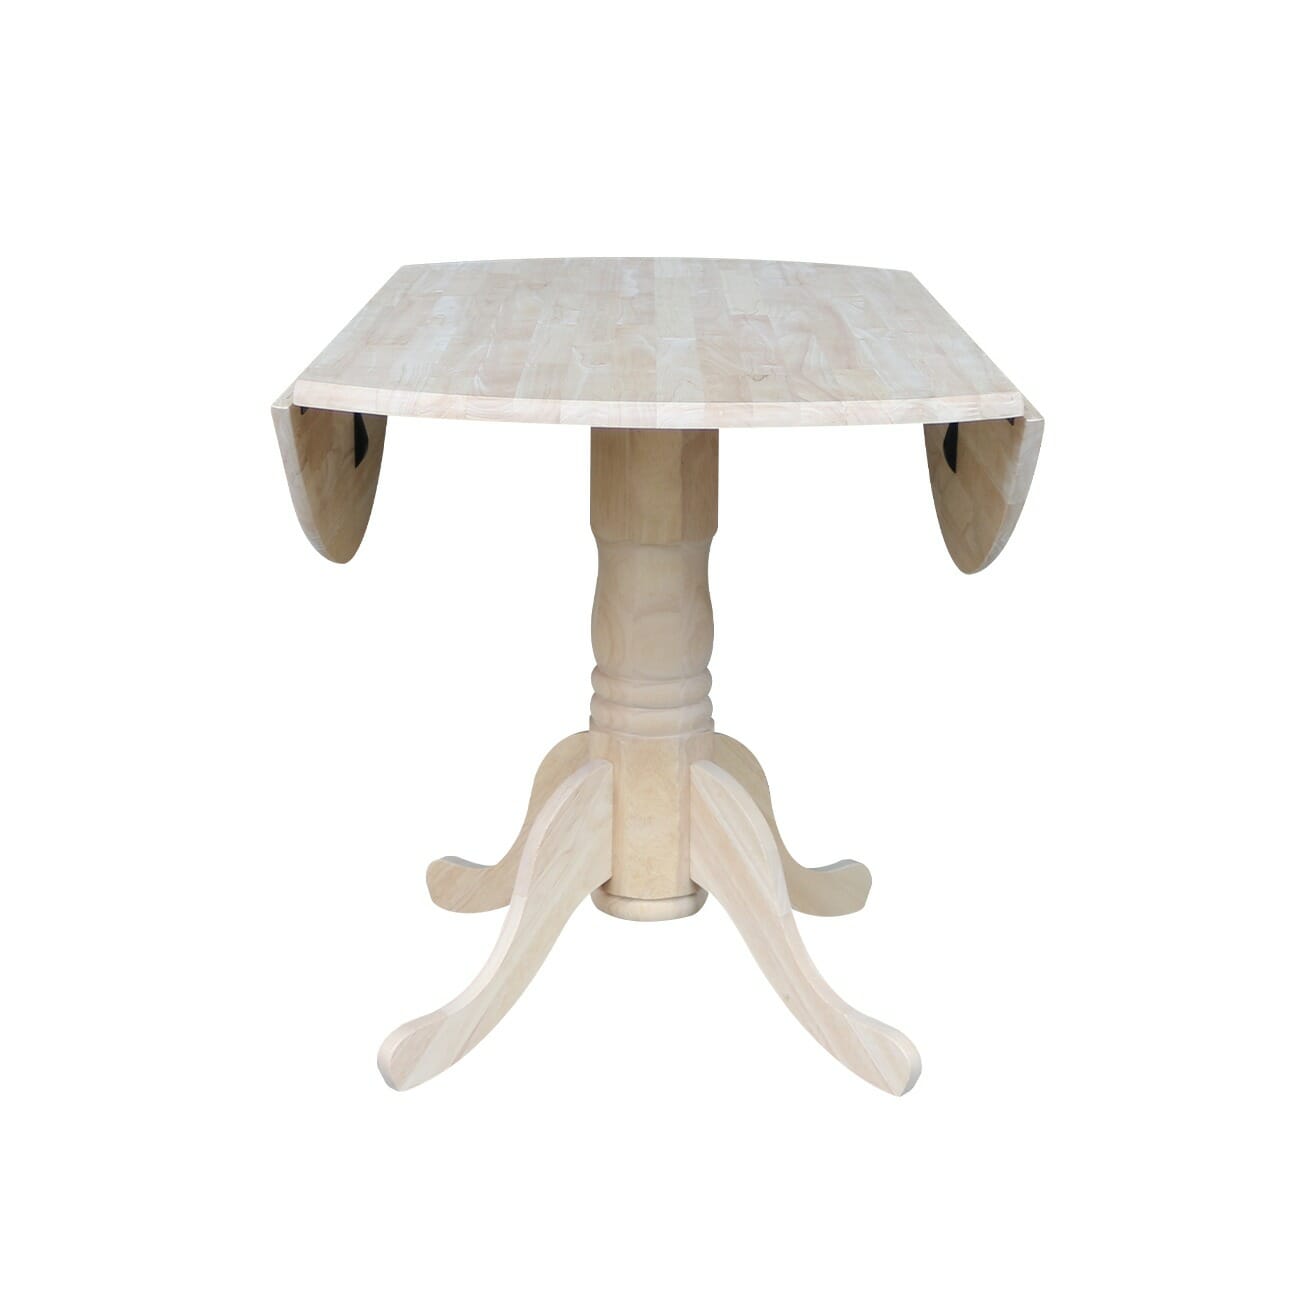 T-42DP 42" Round Drop Leaf Table 2